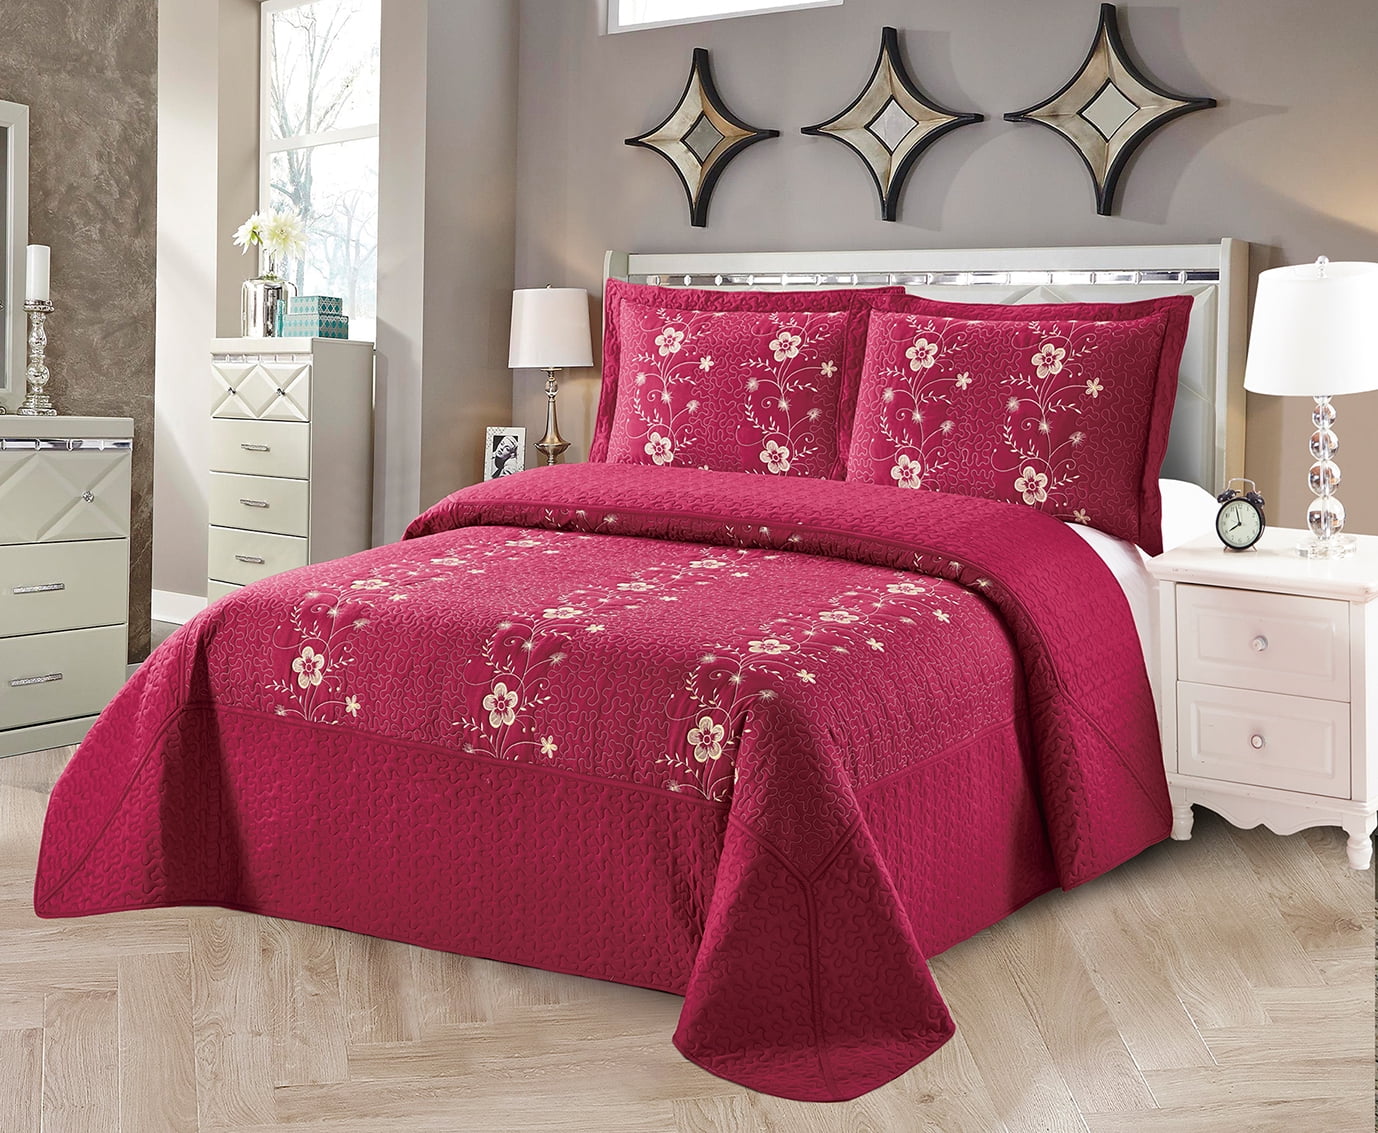 Details about   Quilte Bedspread Coverlet Comforter Bedding Set Cover Pilowcase Bed Sheet 2020 